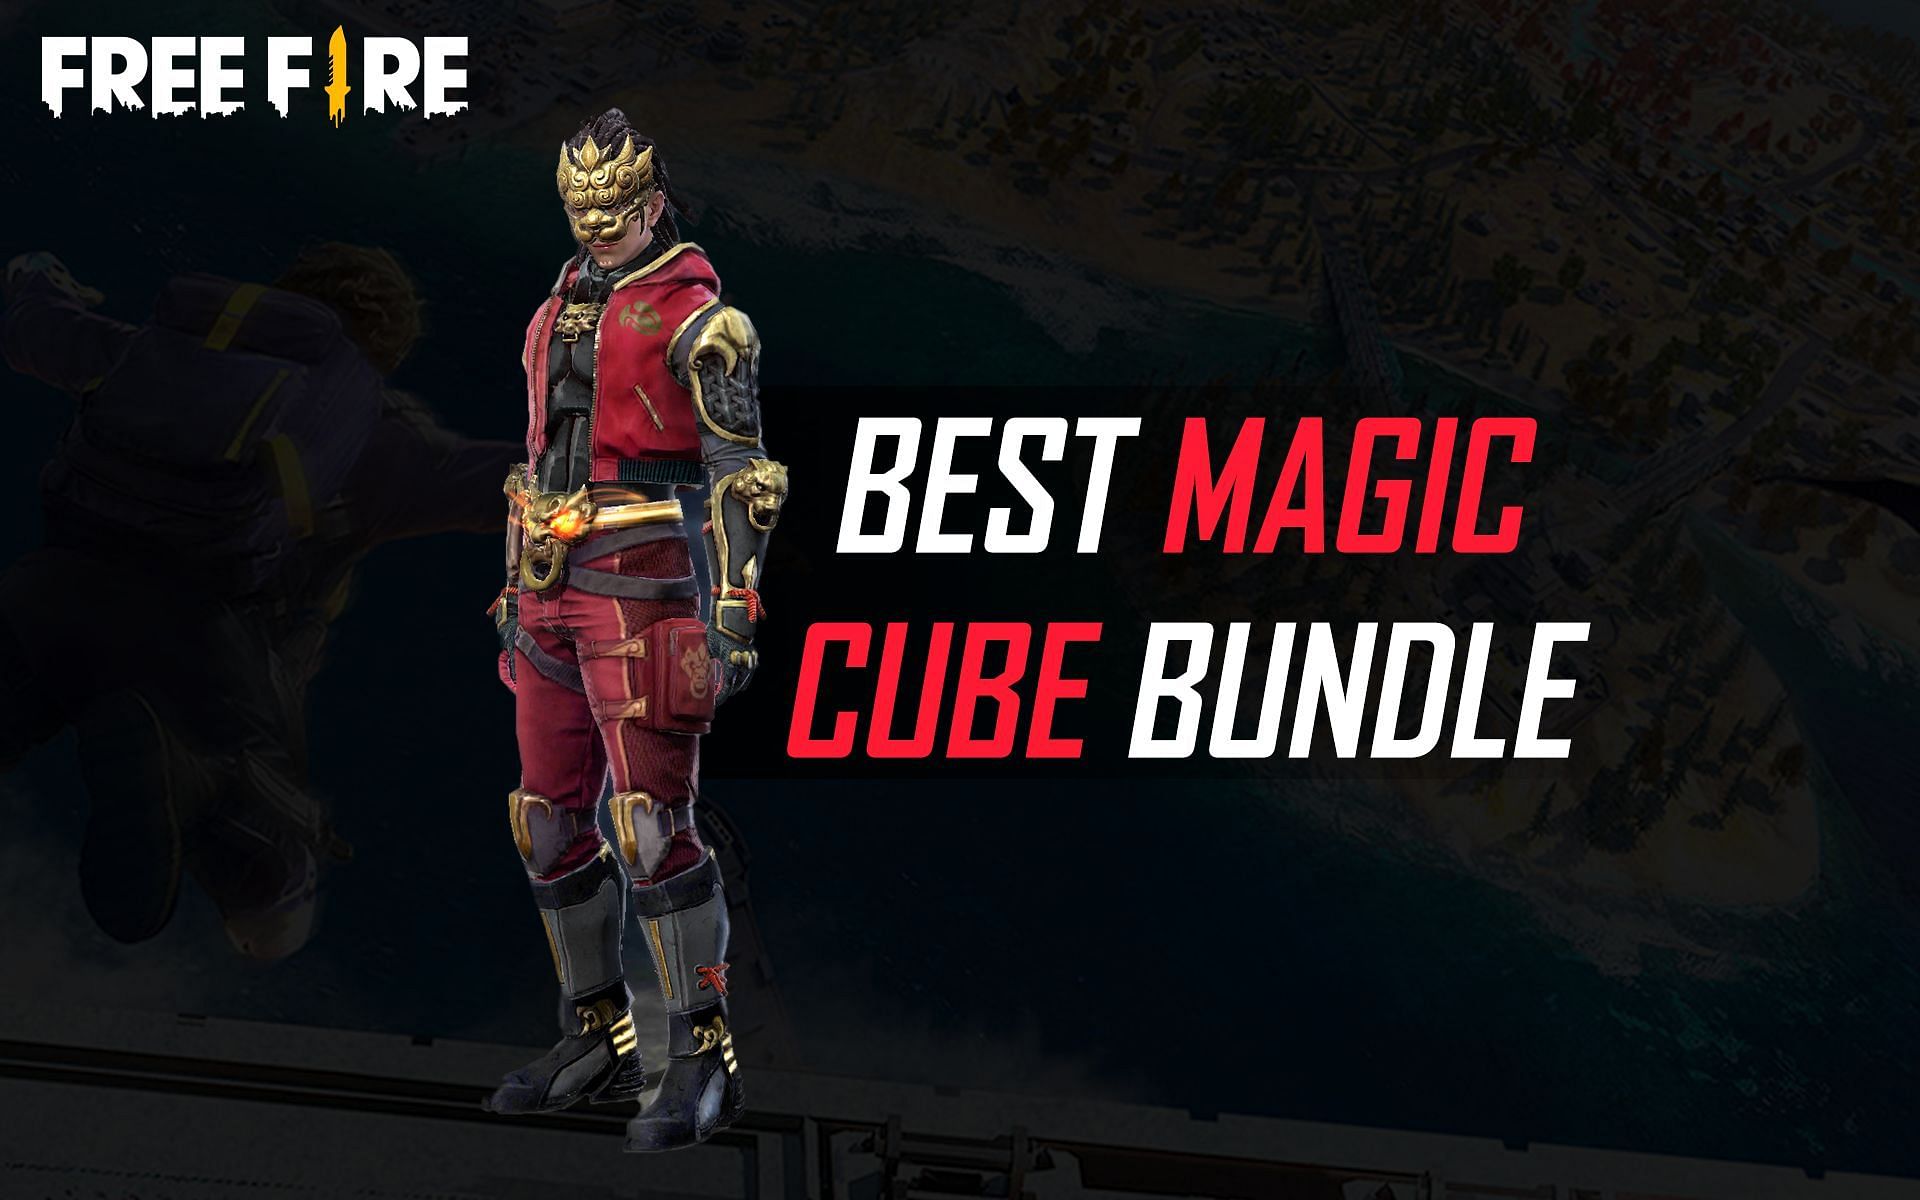 There are several attractive magic cube bundles available (Image via Sportskeeda)